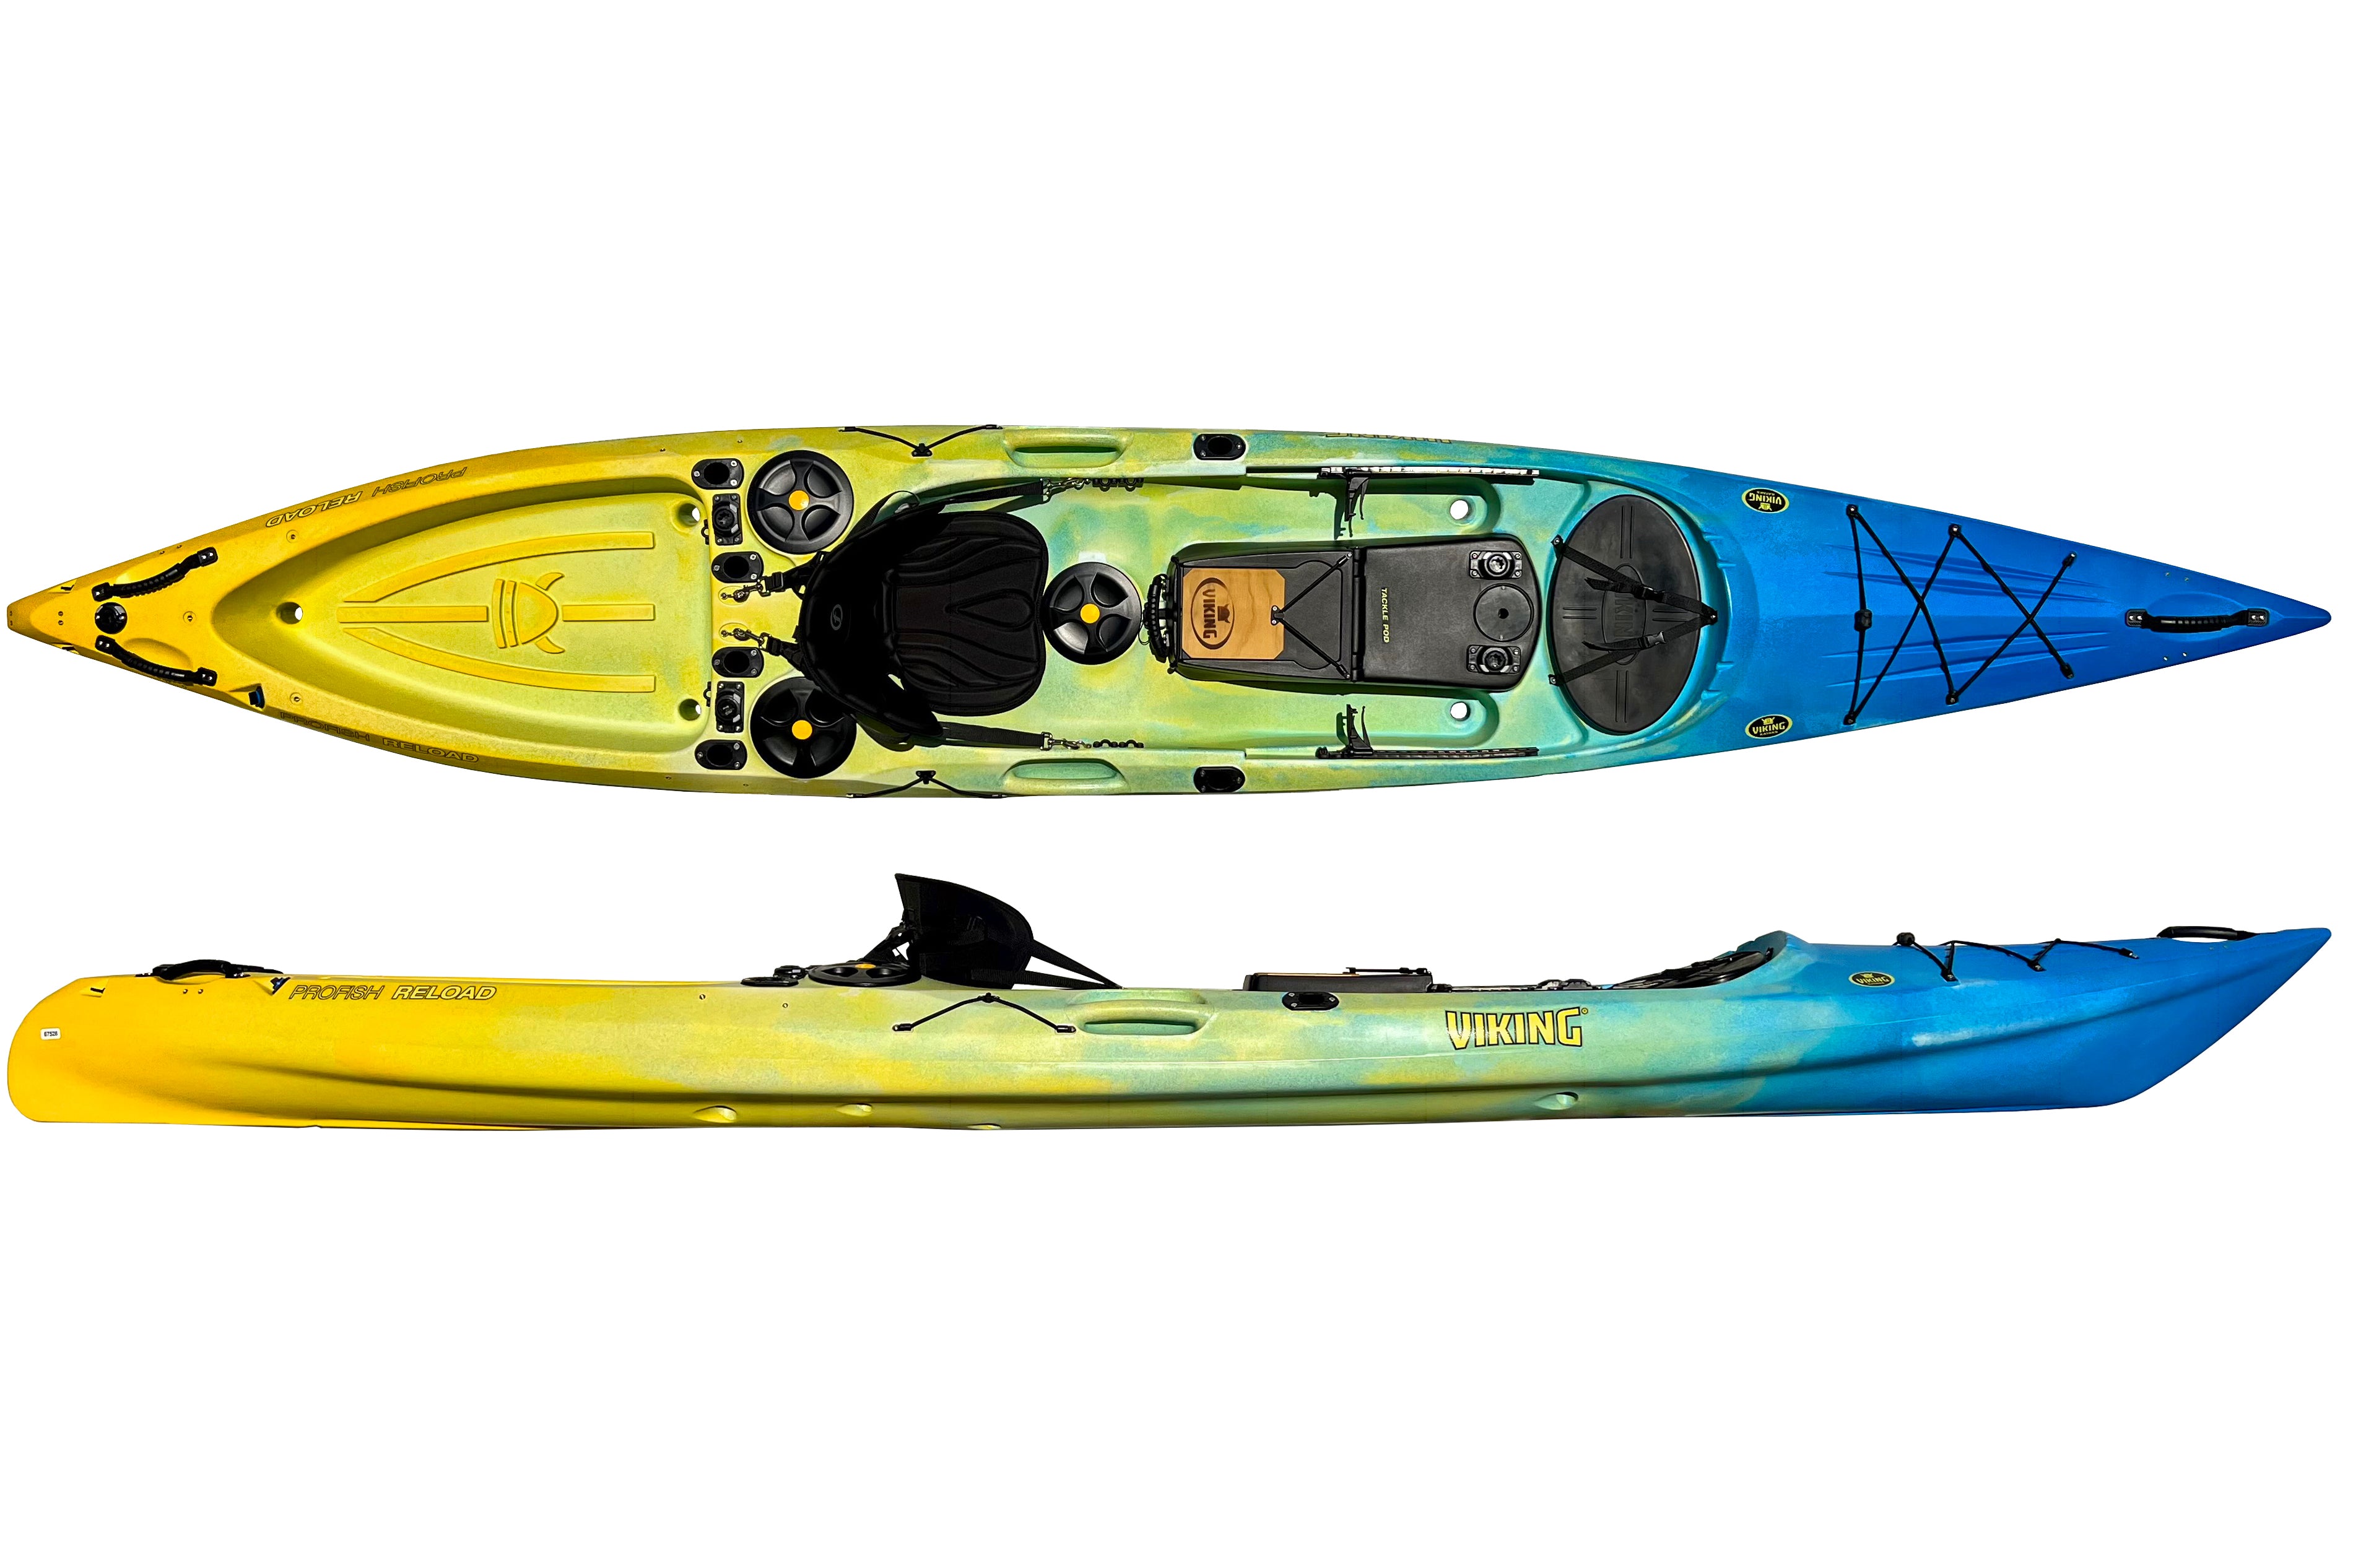 Top and side view of the VIking Kayaks Profish Reload - Daybreak. (FeelFree Seat not included)